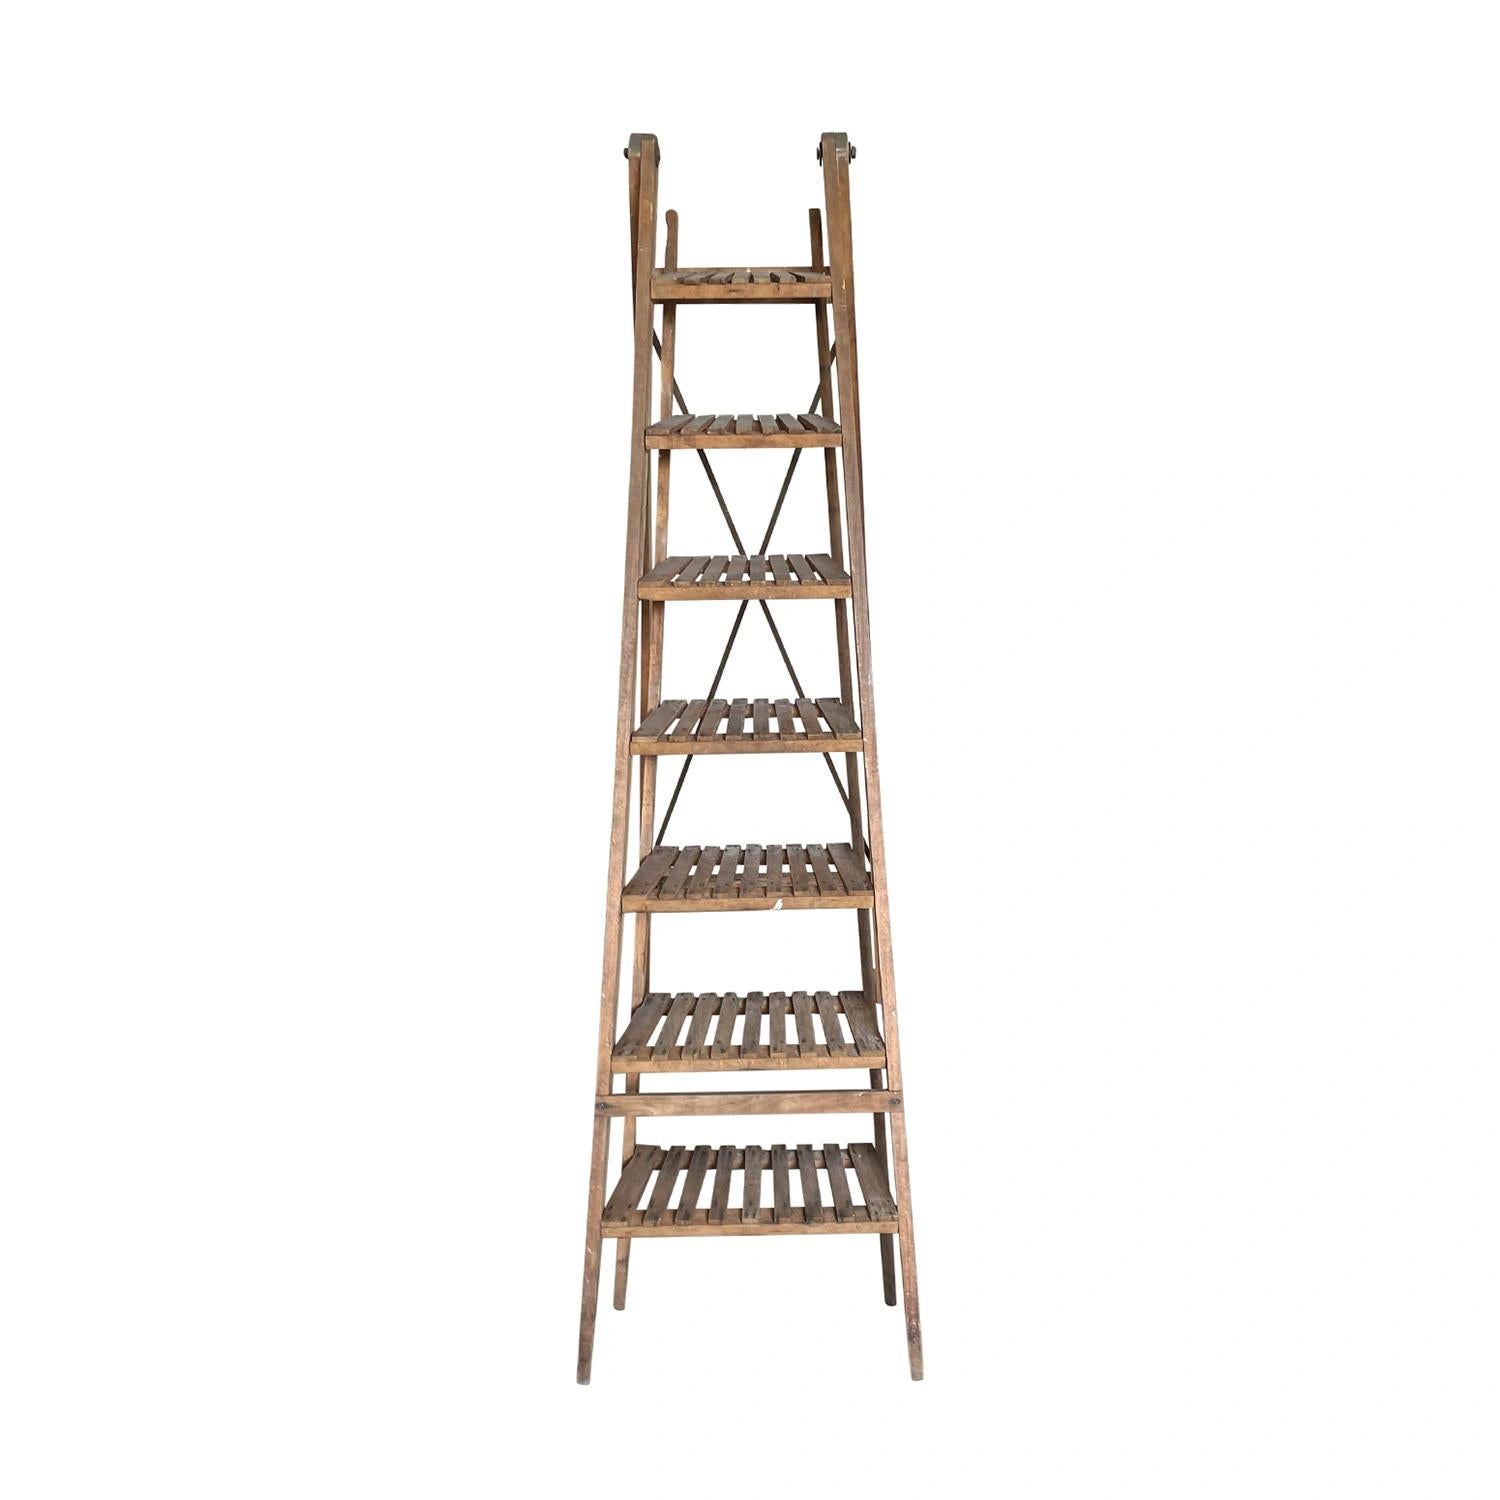 Italian 19th Century Light-Brown French Walnut Library Ladder, Antique Book Shelf For Sale